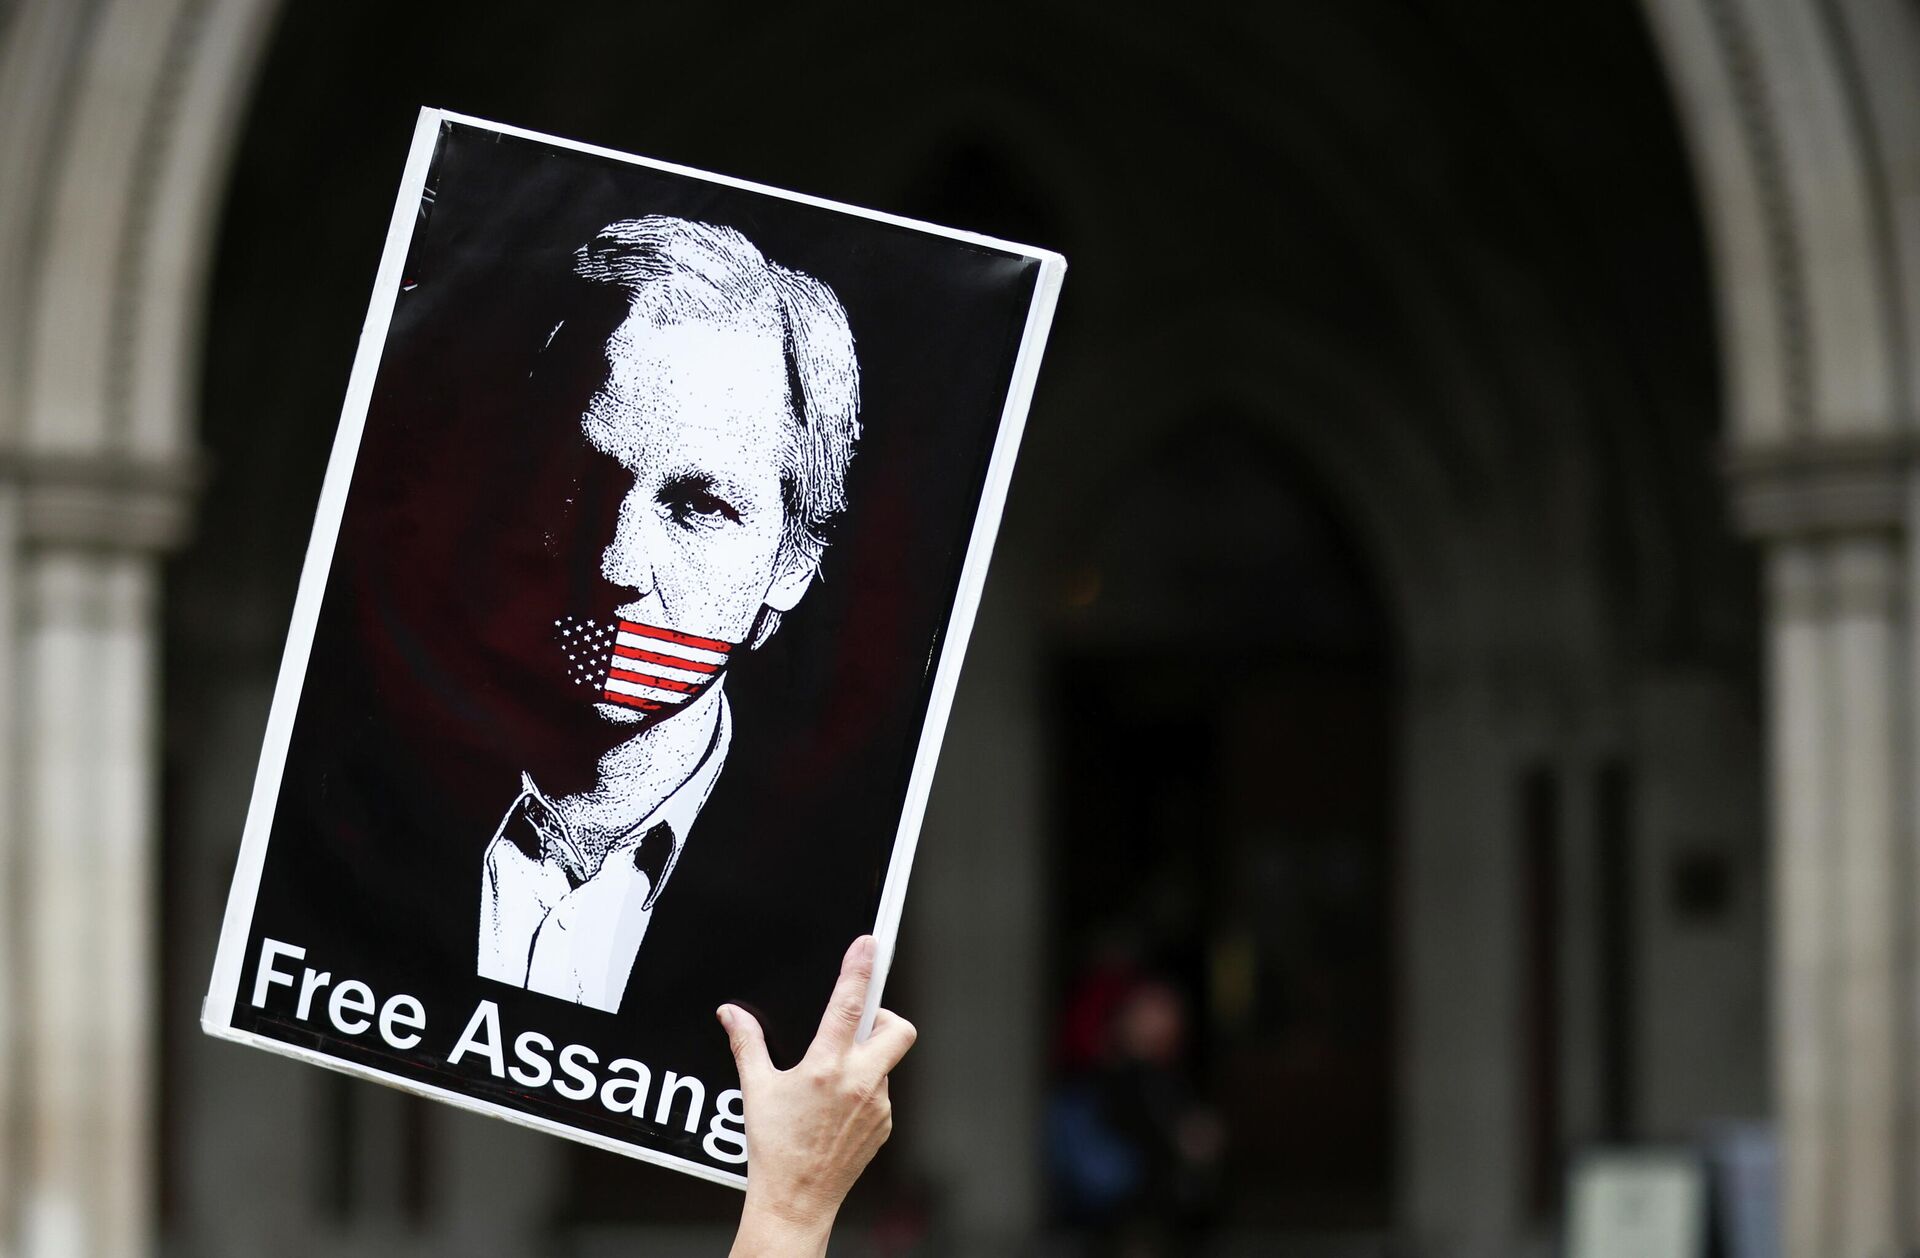 A supporter of Wikileaks founder Julian Assange protests outside the Royal Courts of Justice in London, Britain, October 27, 2021. REUTERS/Henry Nicholls - Sputnik International, 1920, 02.11.2021